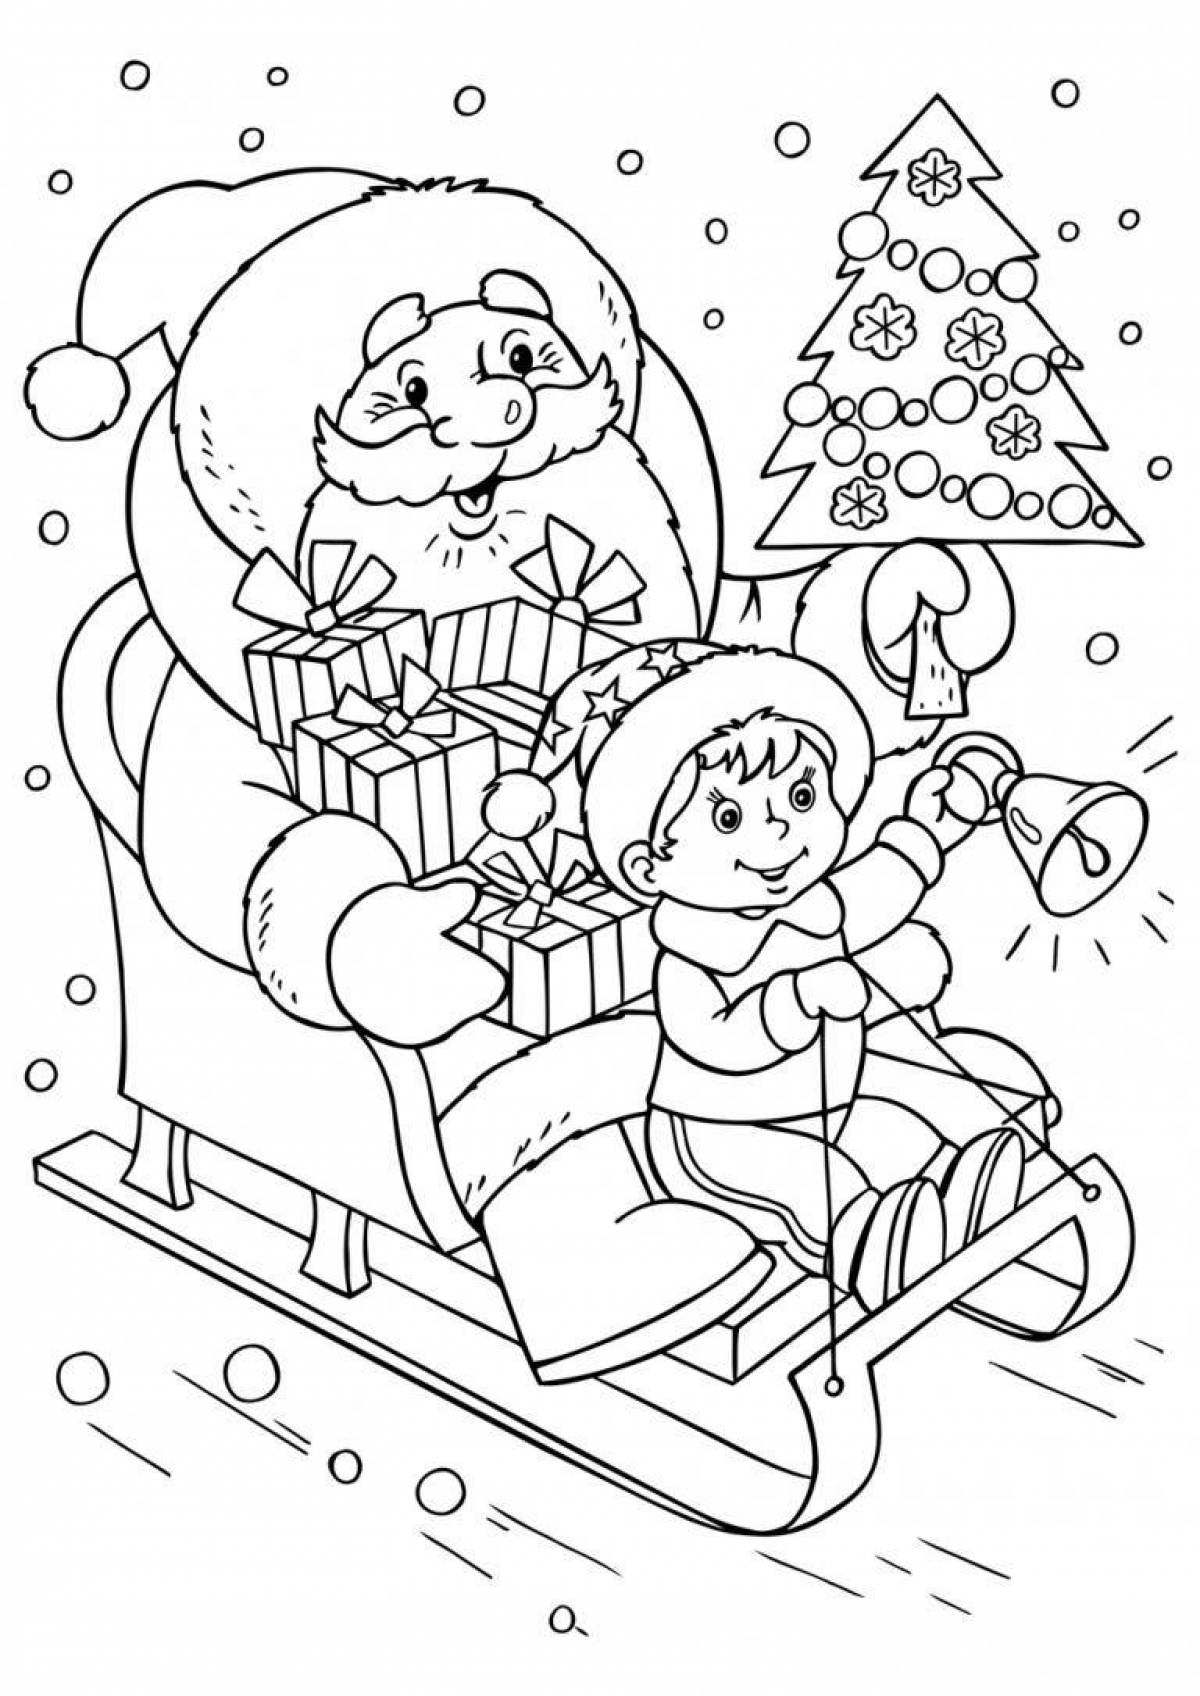 Radiant children's Christmas coloring book